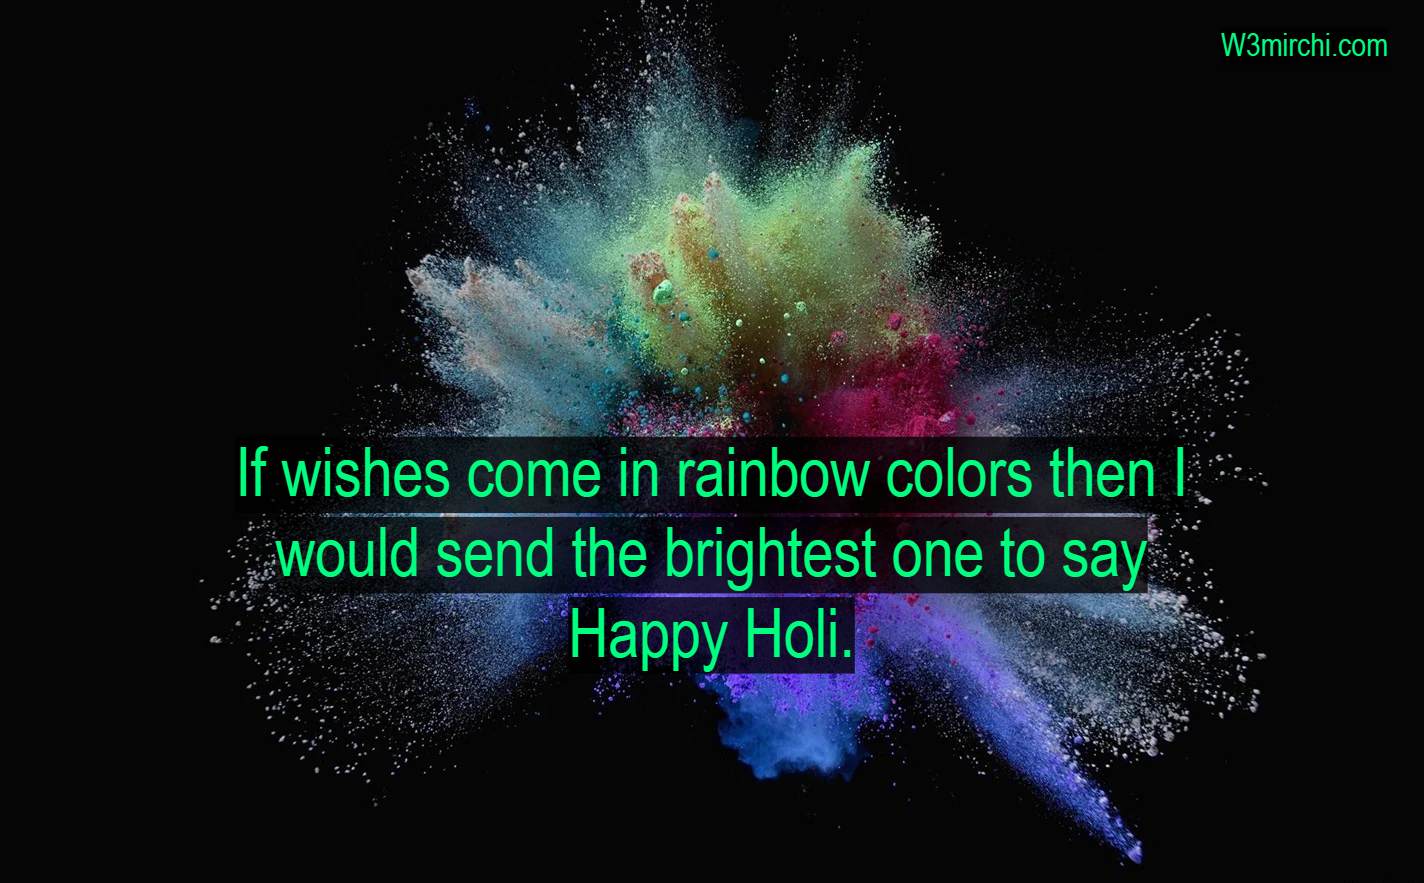 If wishes come in rainbow